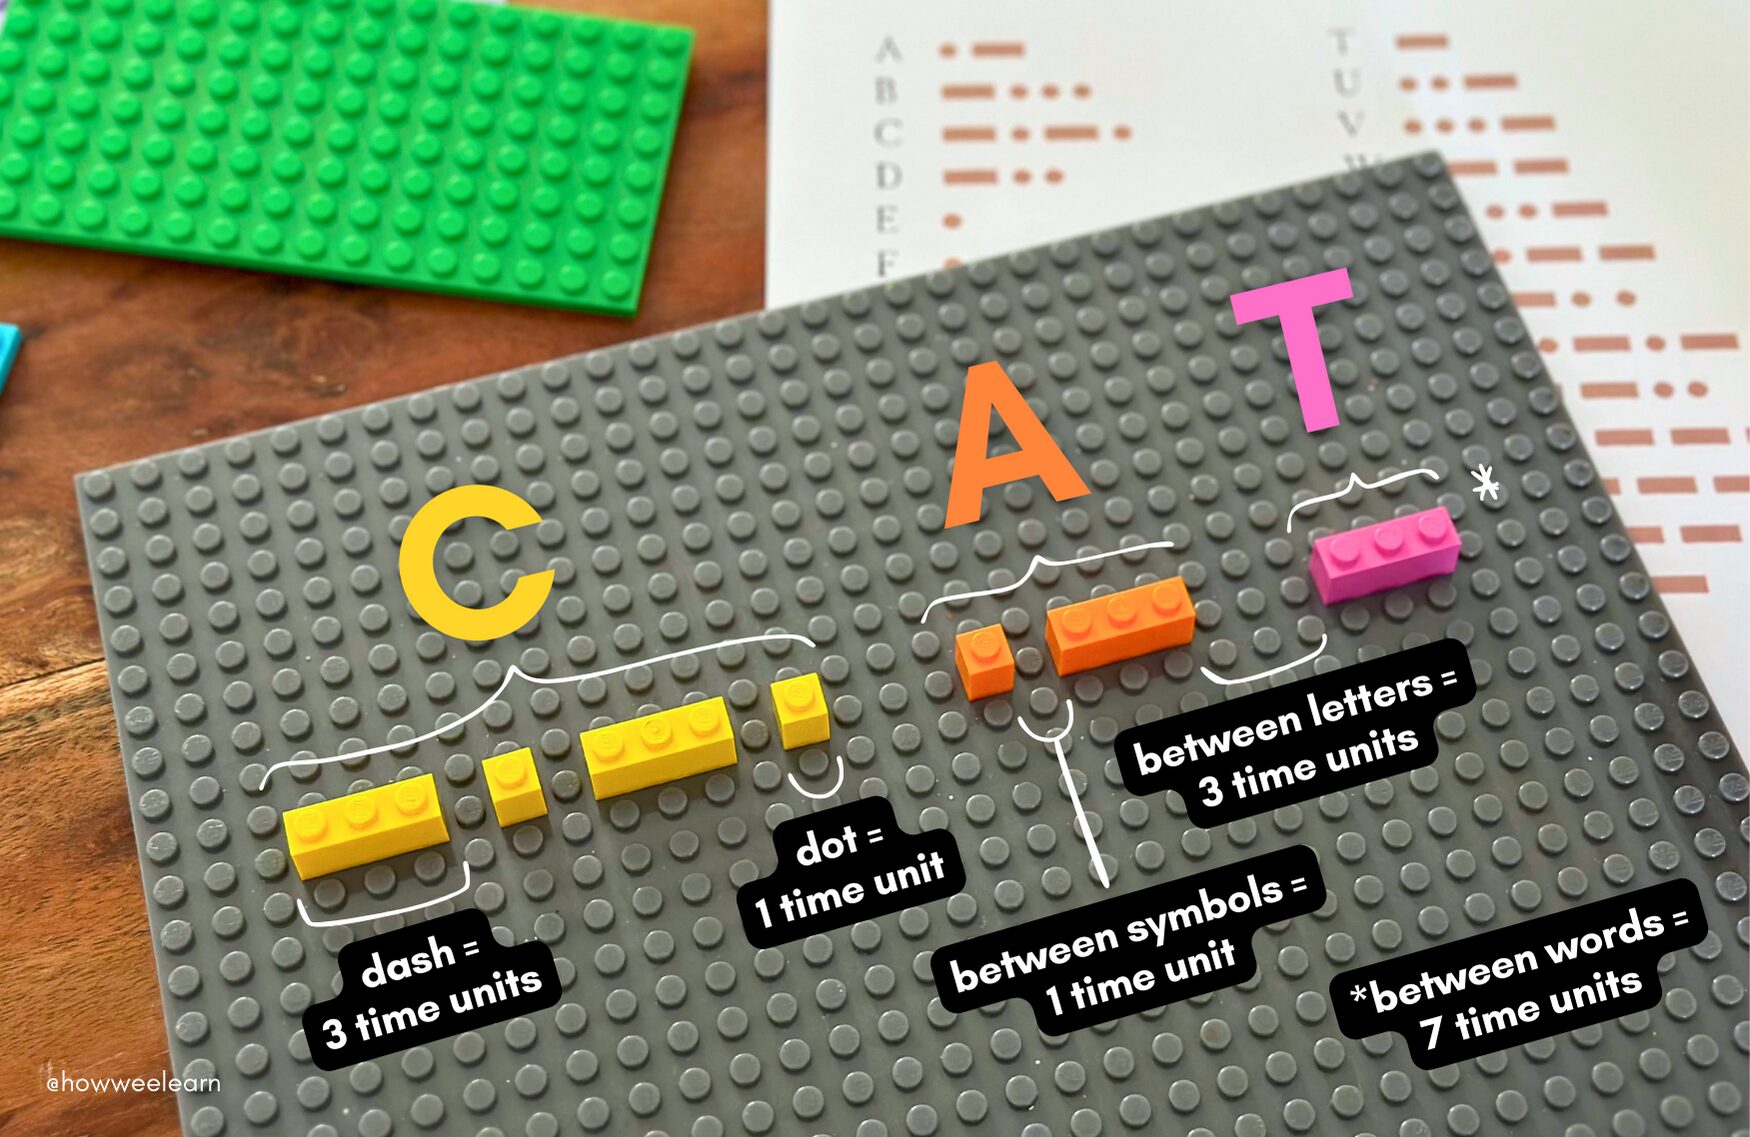 Morse Code Lego Activity showing the spacing between symbols, letters, and words